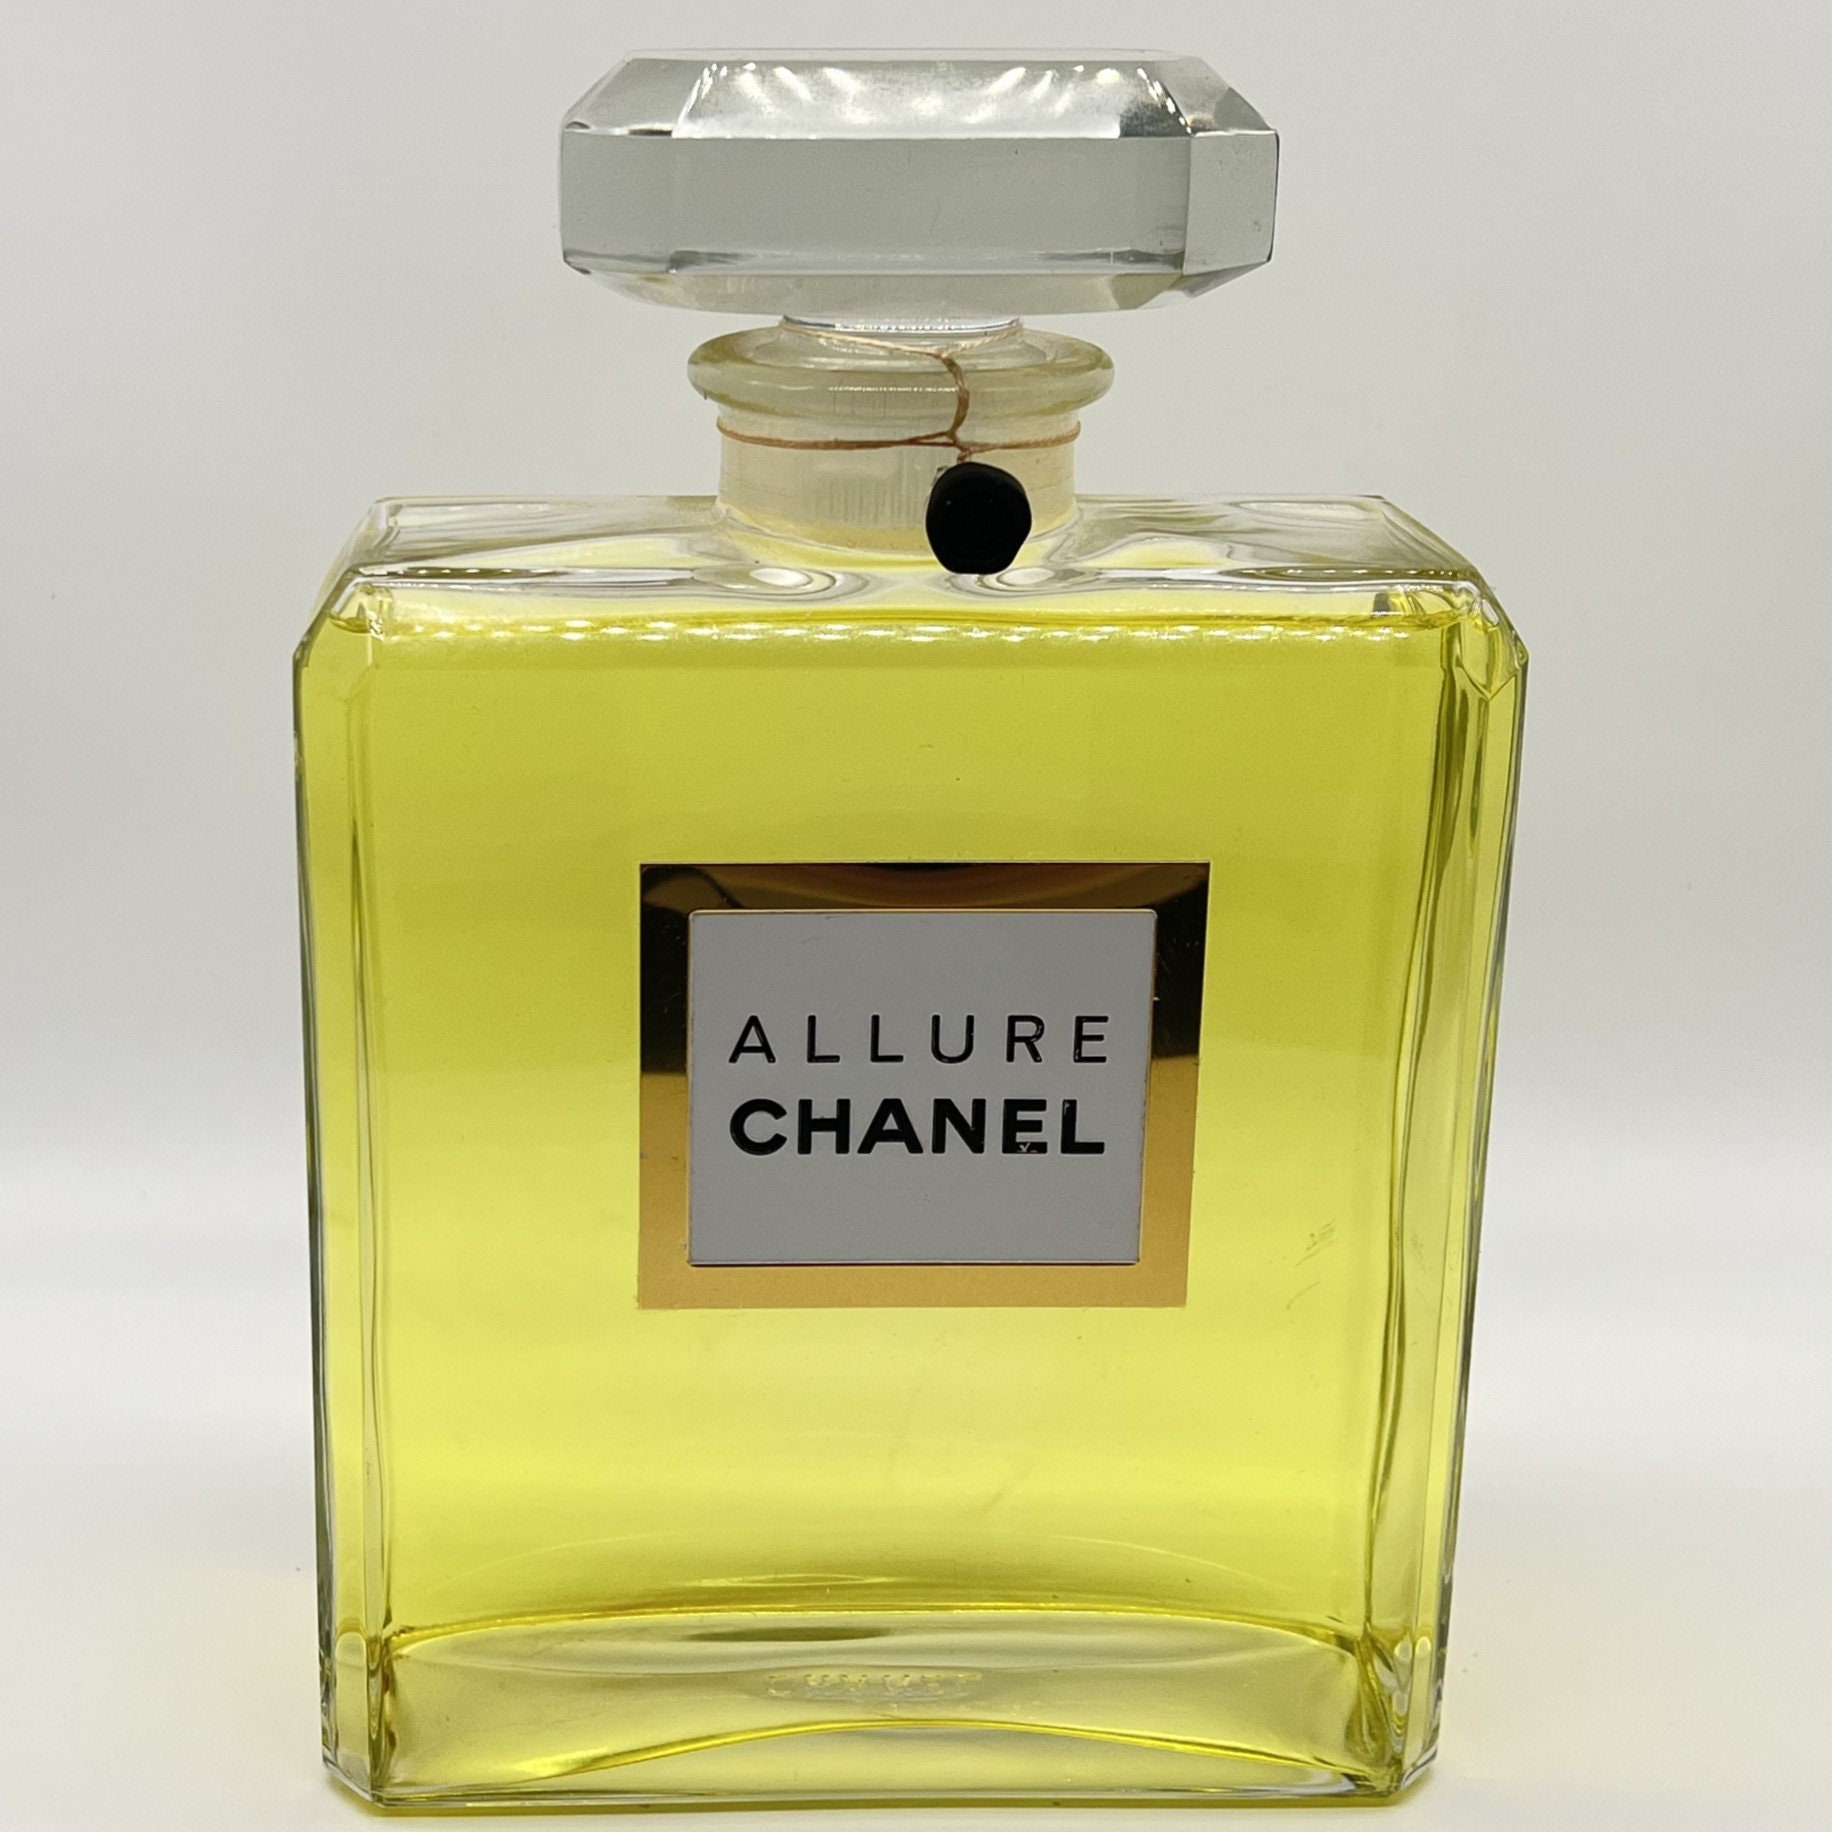 Sold at Auction: 2 Bottles Coco Chanel & 1 Allure by Chanel